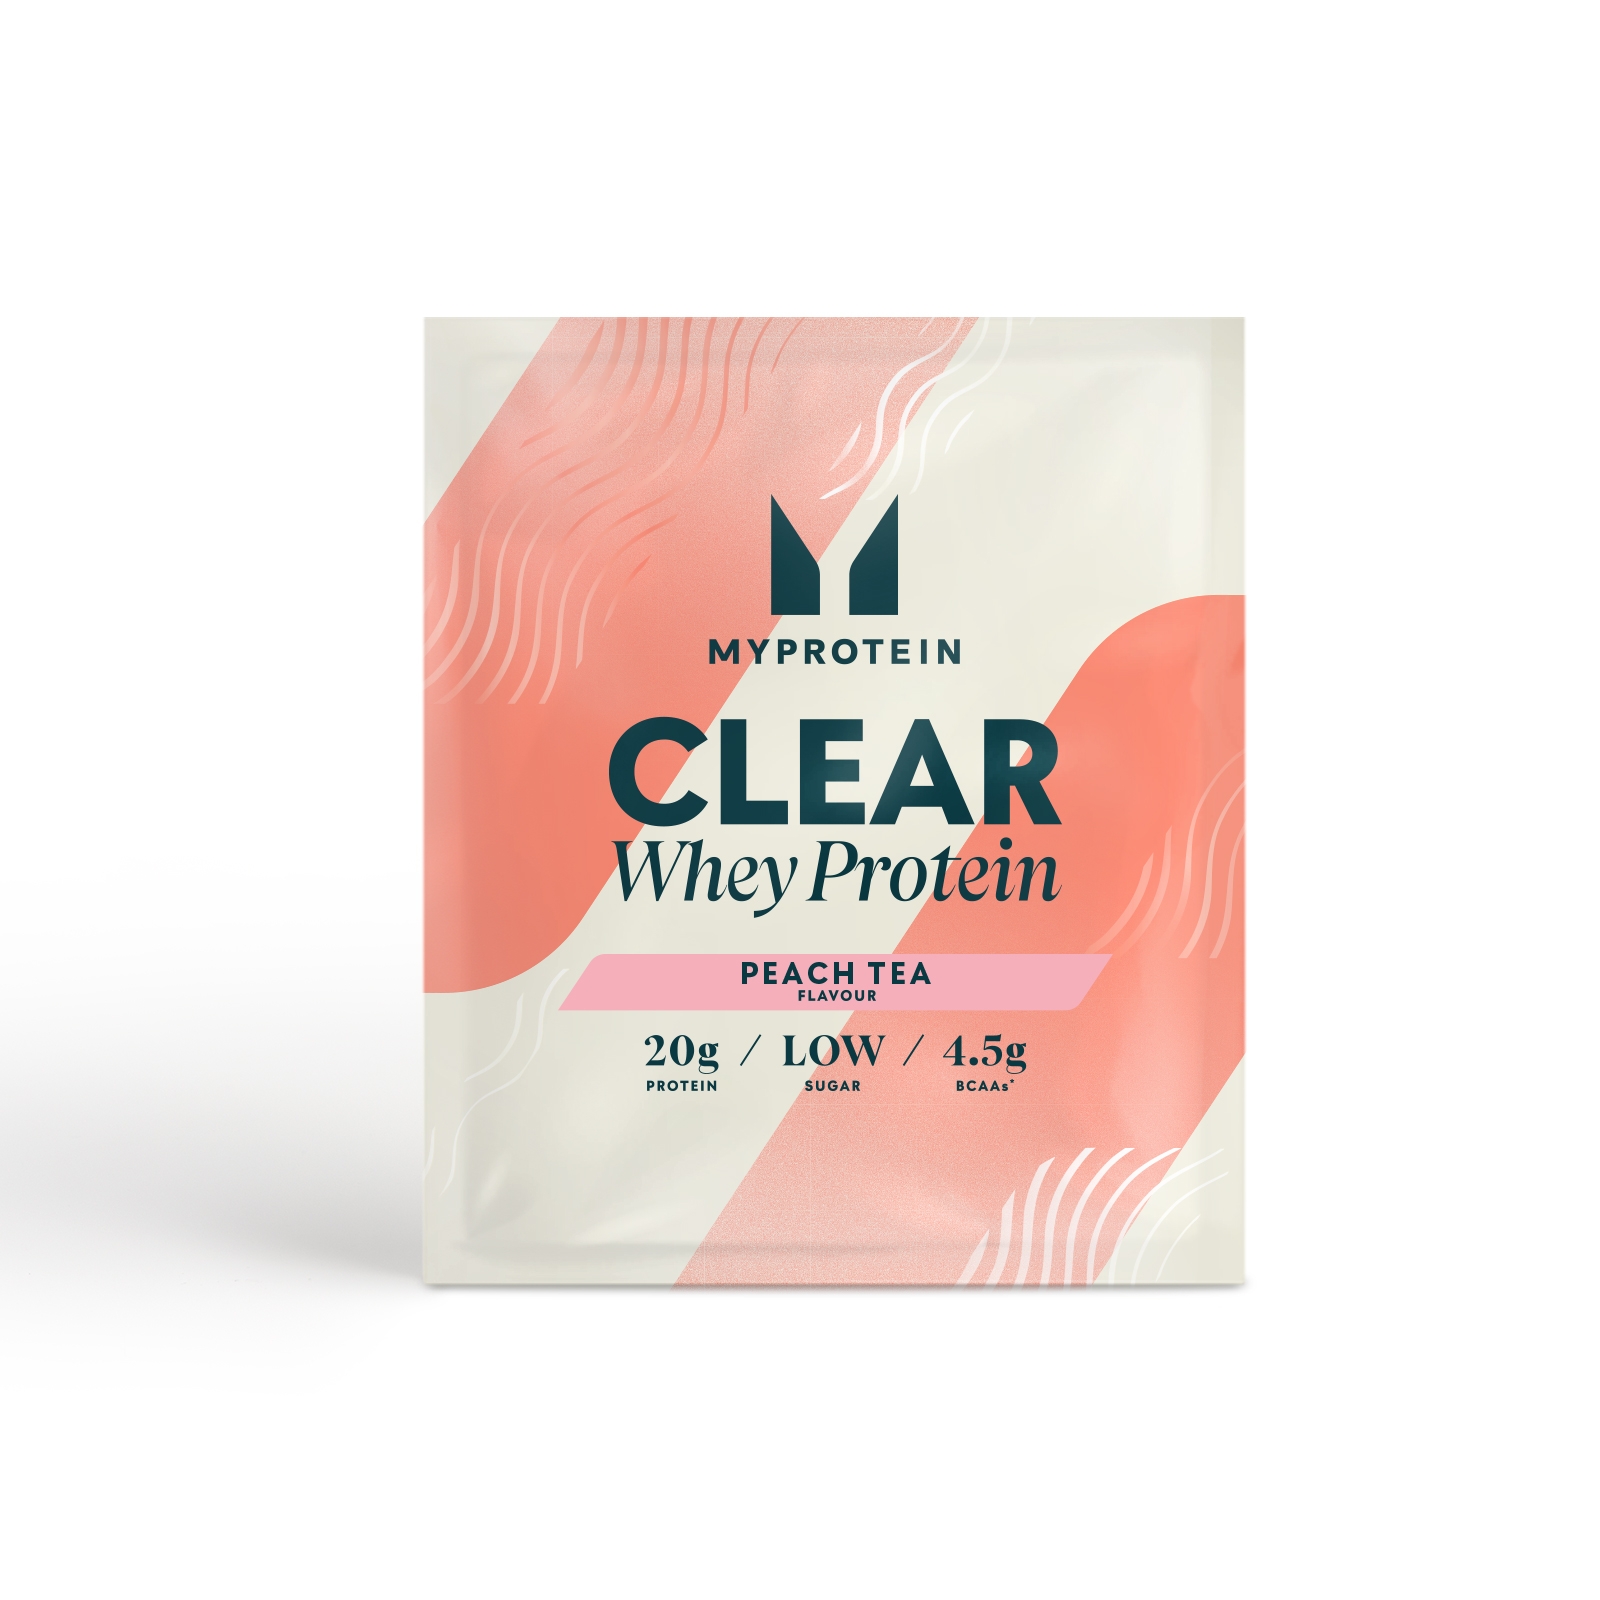 Myprotein Clear Whey Isolate (Sample) - 1servings - Chá de Pêssego